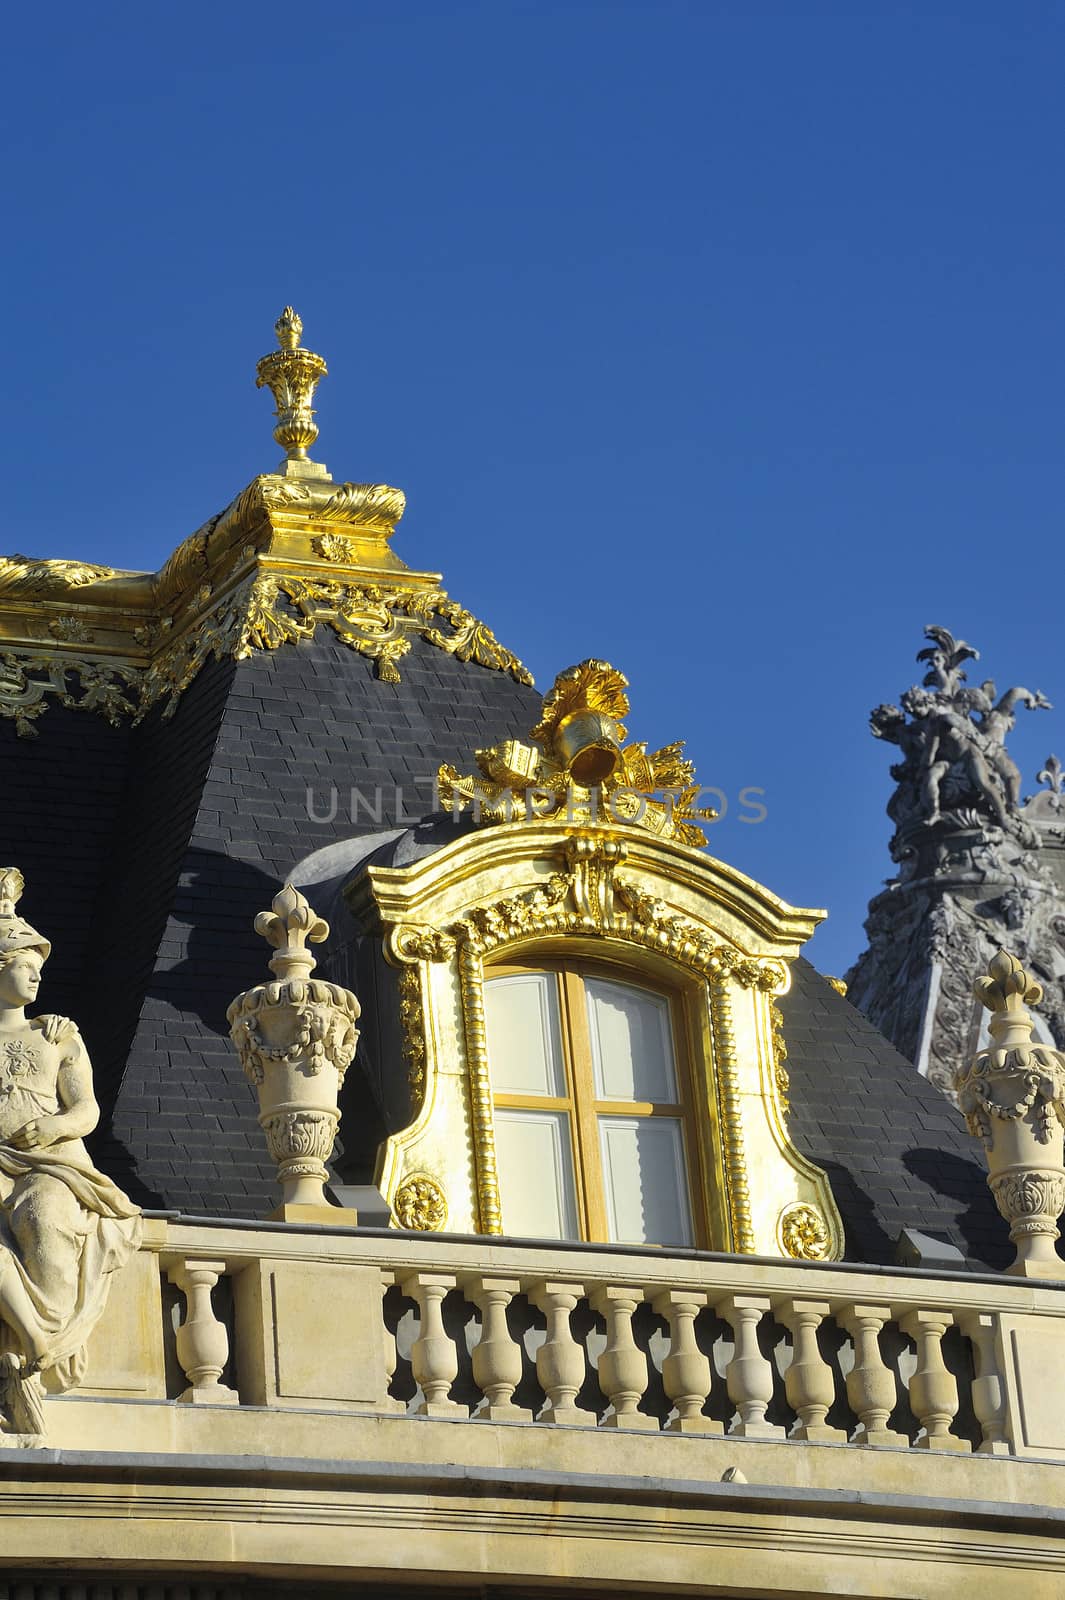 chateau de Versailles, architectural detail and gilding of the facade and roof